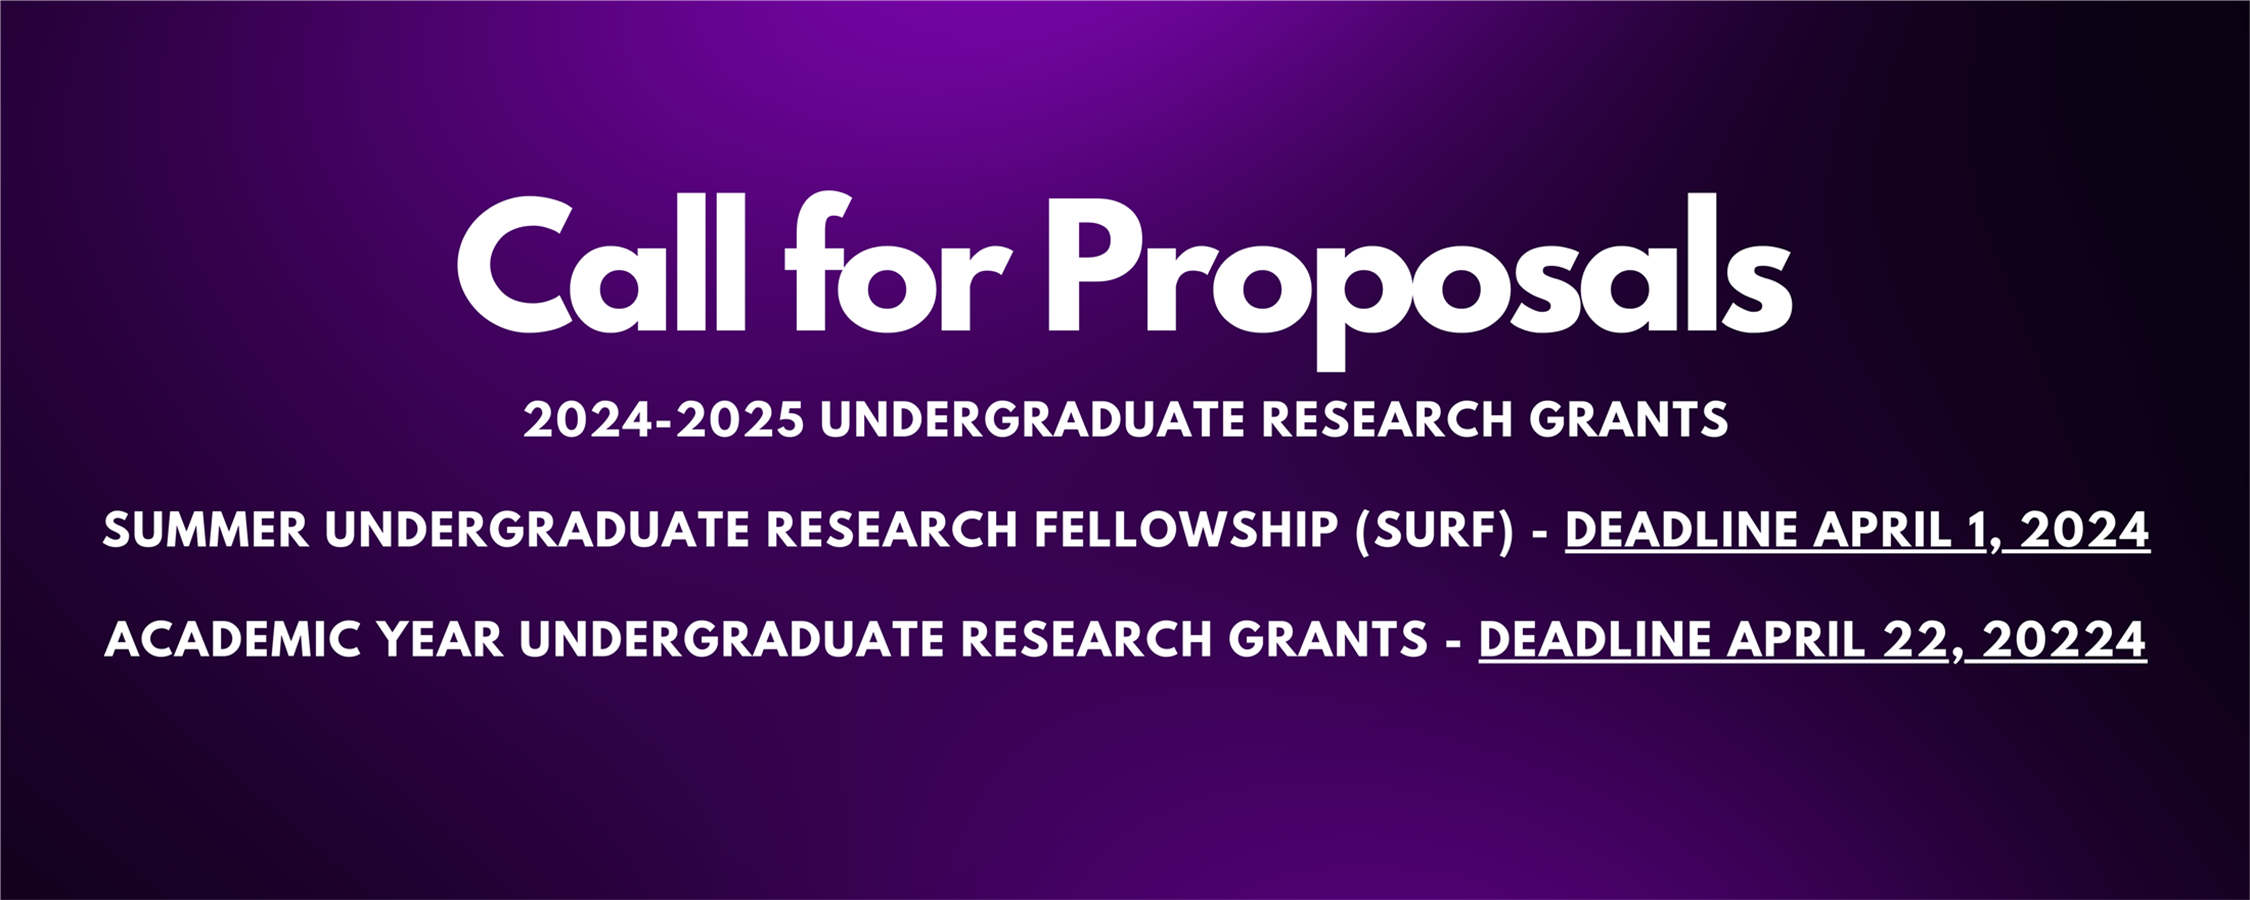 Call for proposals for undergraduate research grants